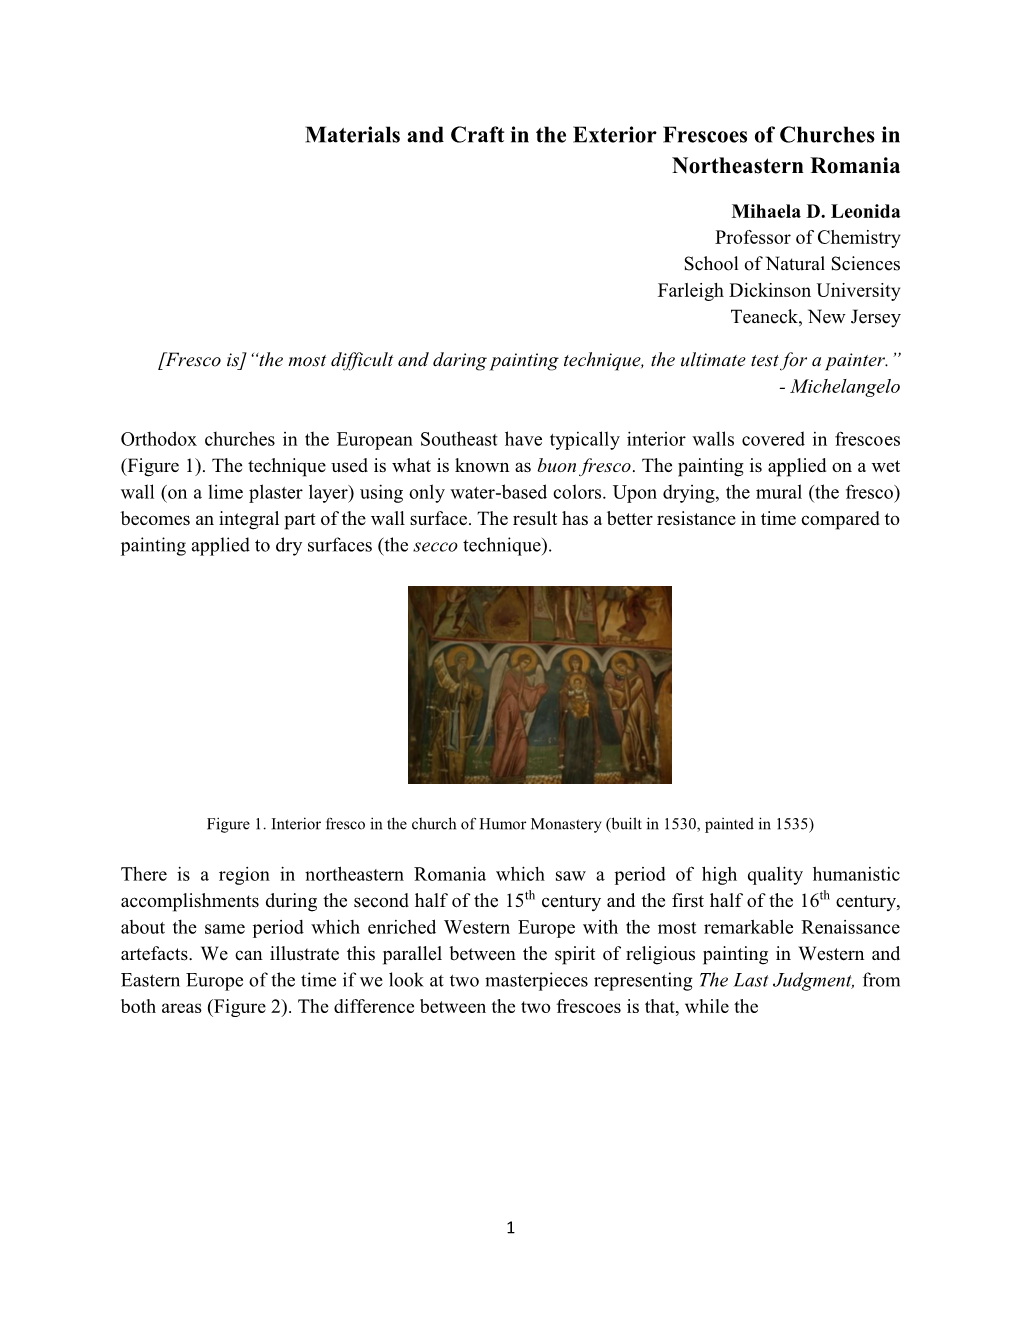 Materials and Craft in the Exterior Frescoes of Churches in Northeastern Romania